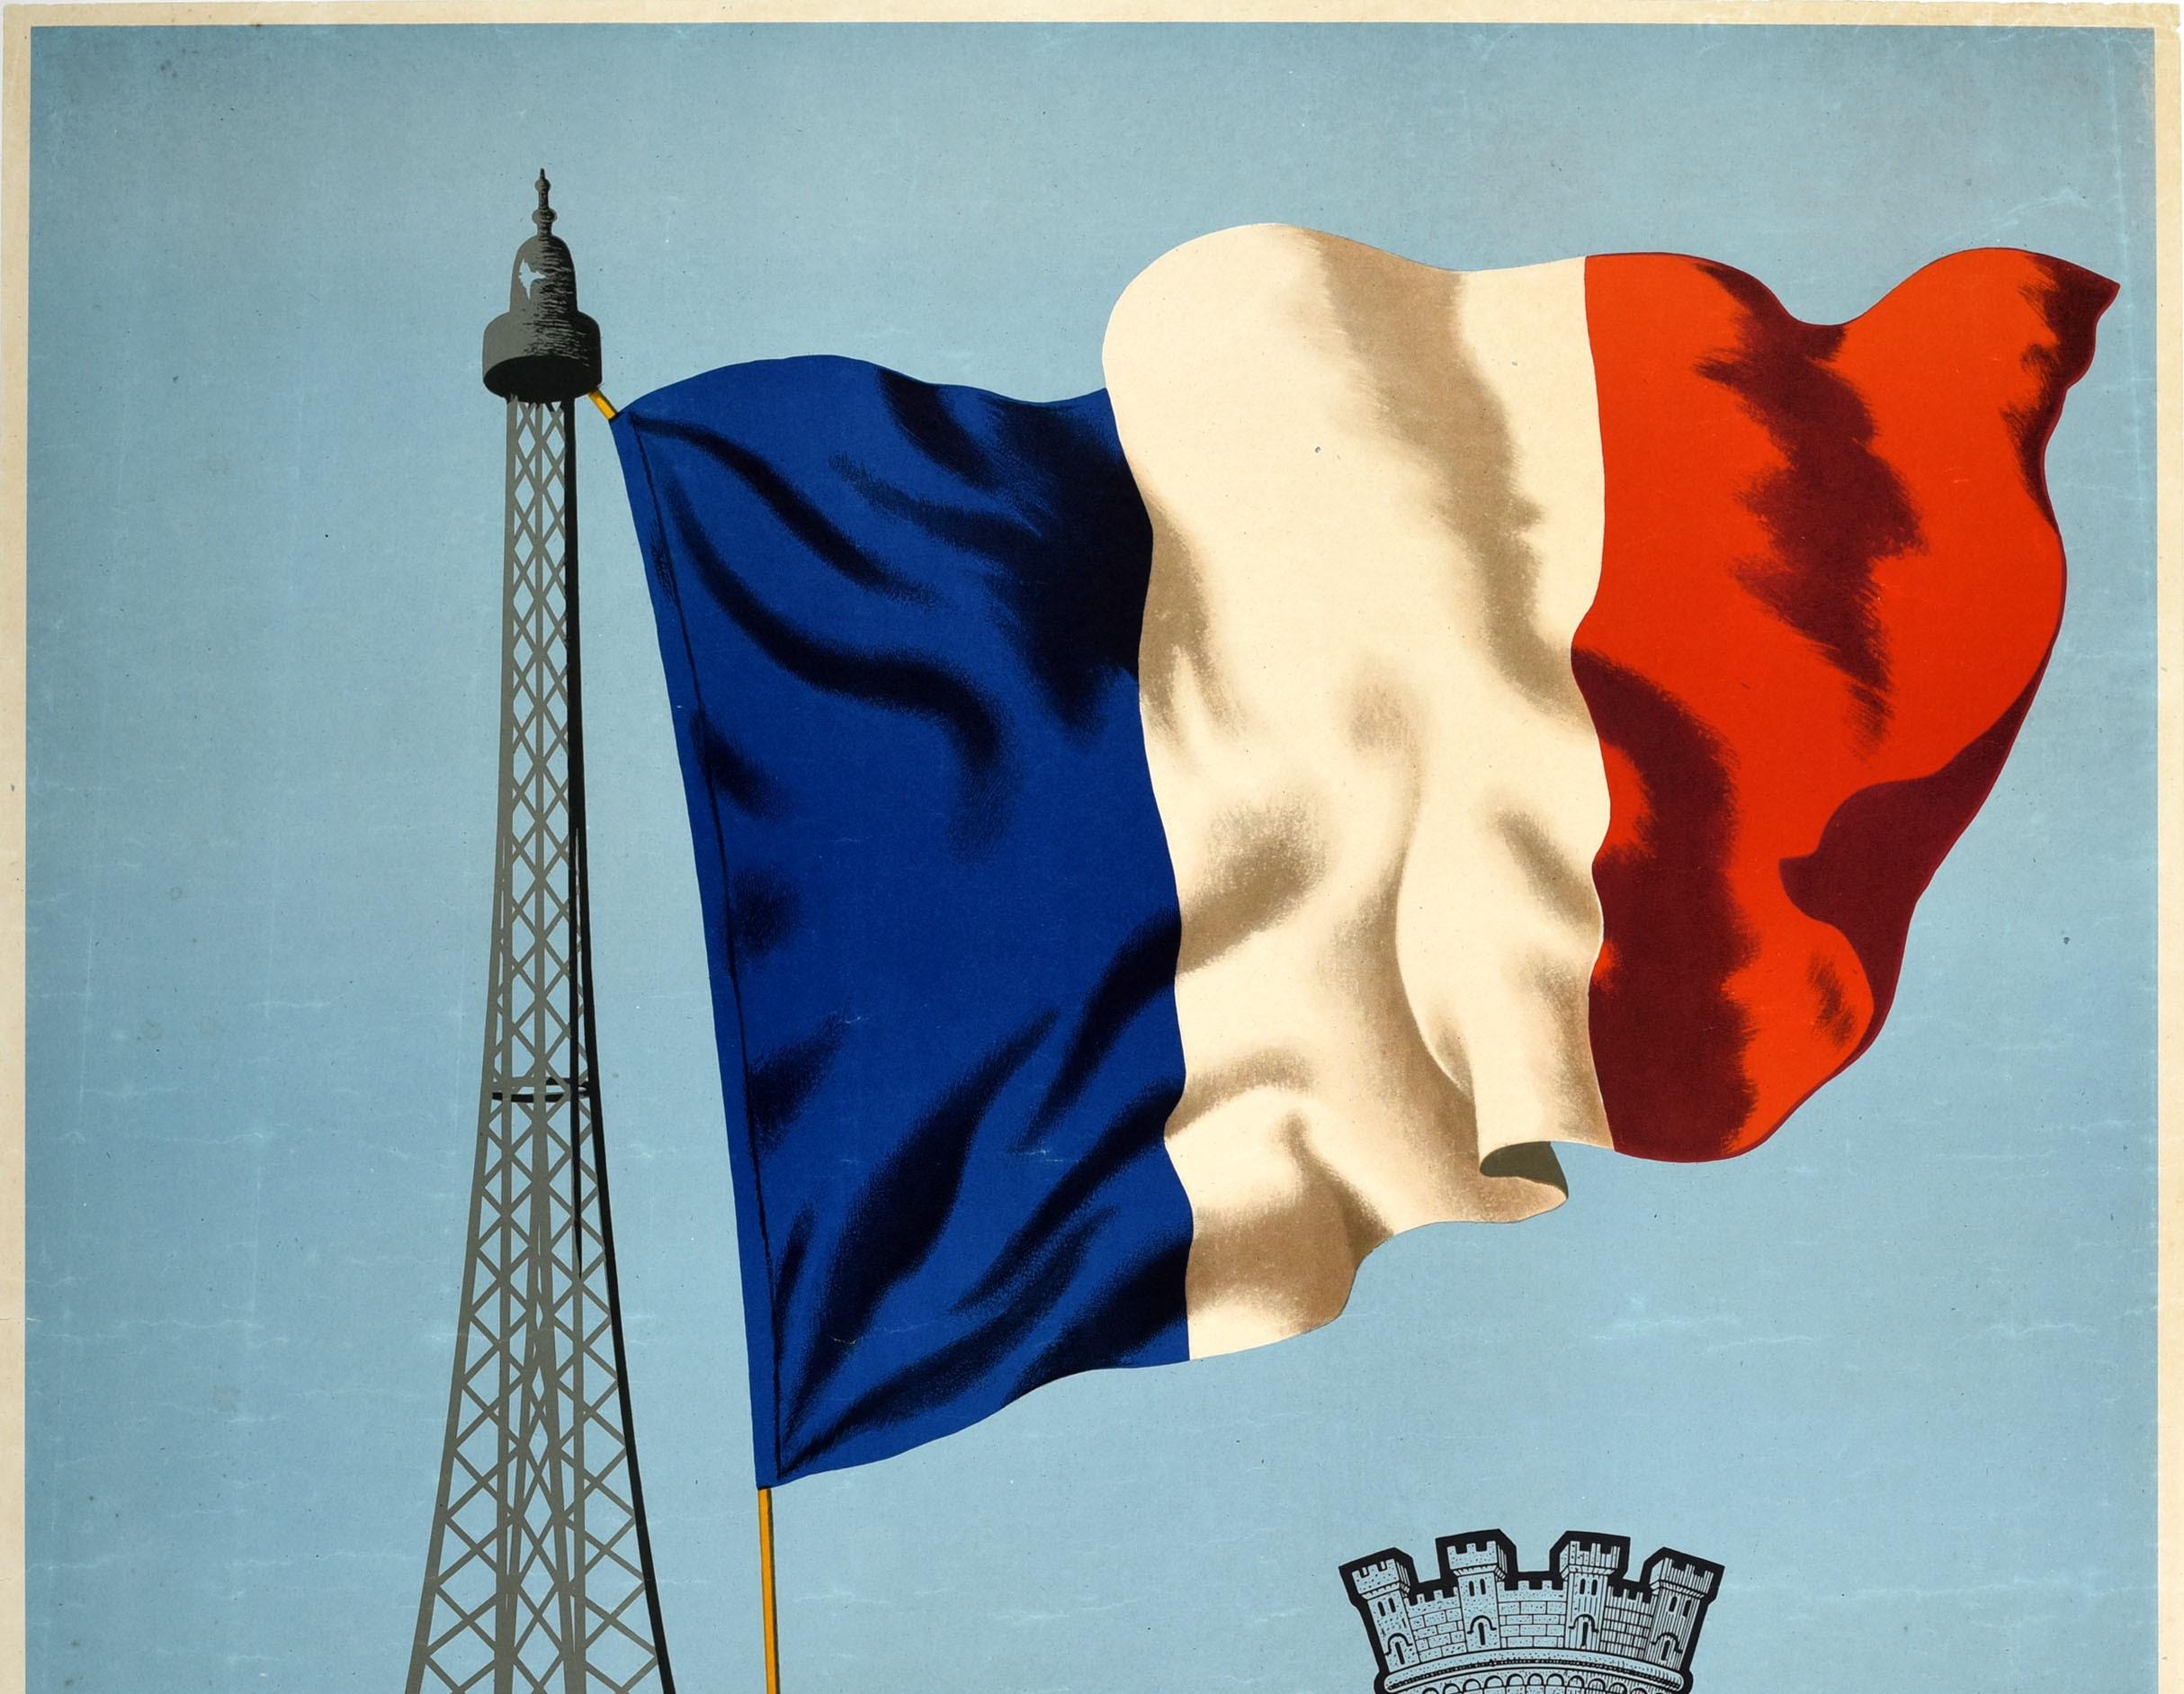 Original vintage World War Two French liberation poster featuring a large blue, white and red flag flying on the side of the Eiffel Tower with the Blason de Paris / coat of arms of Paris on the side showing a sailing ship below a royal fleur-de-lis